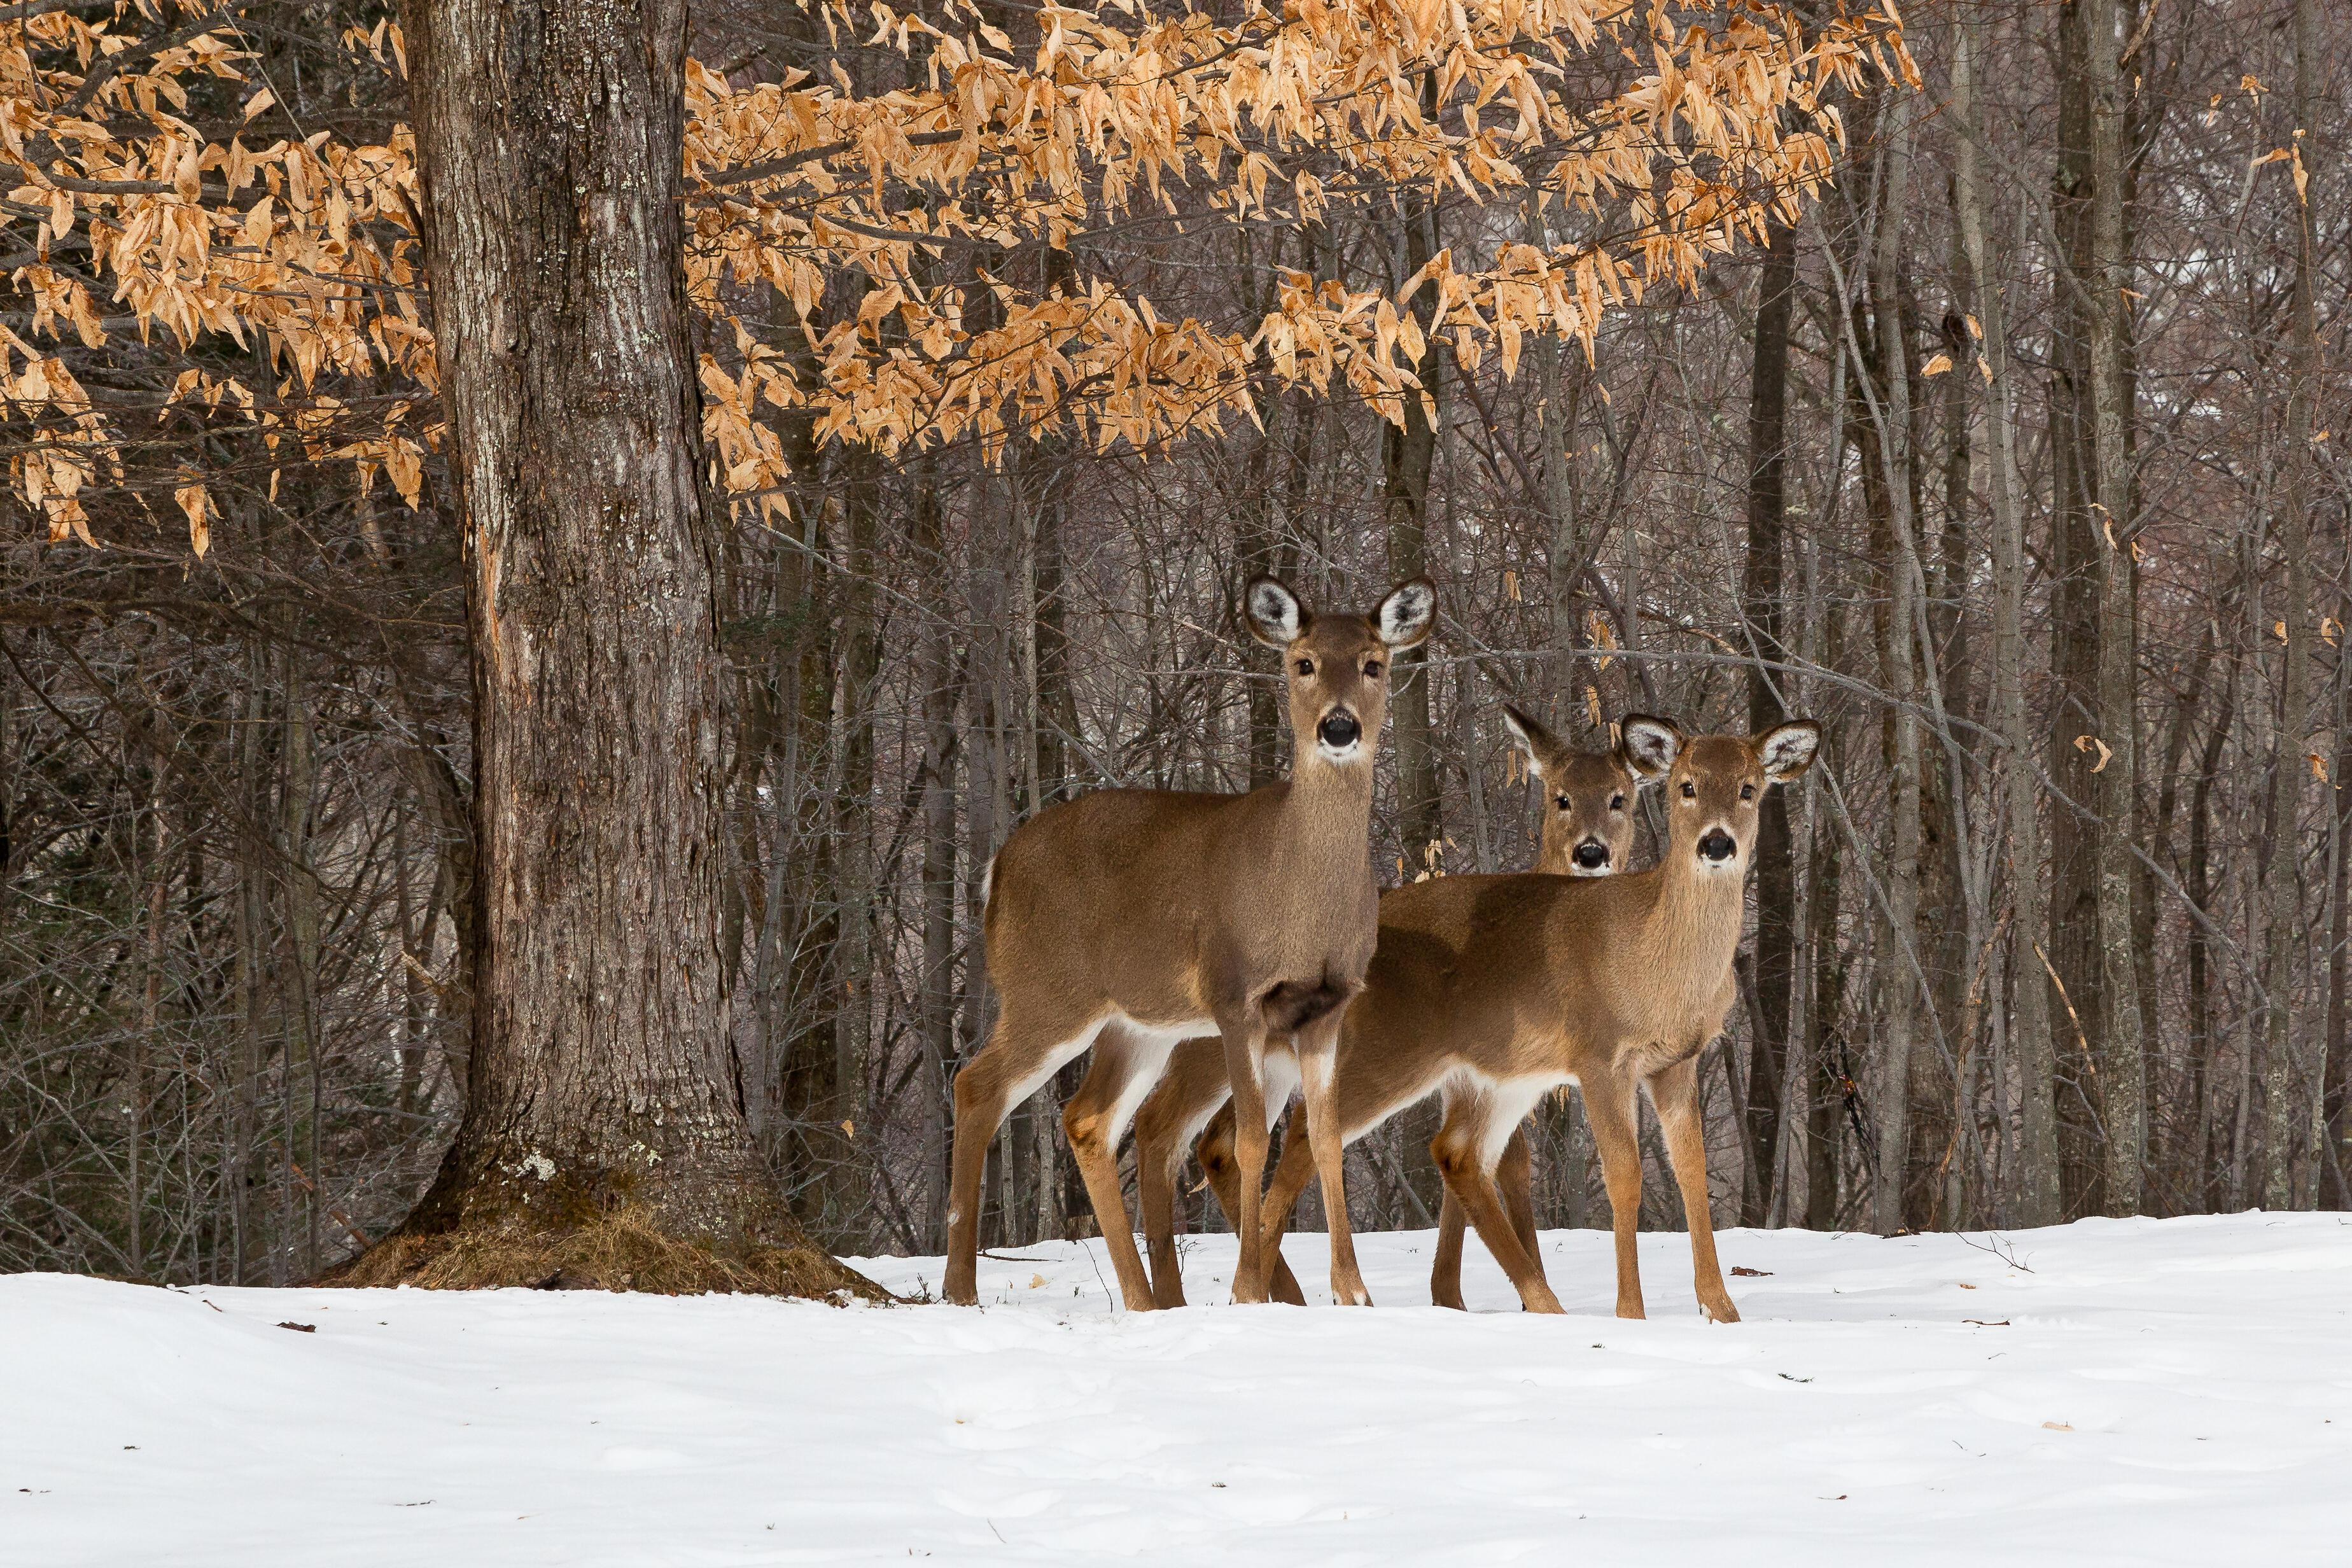 Two white-tailed deer stand in a snowy forest.